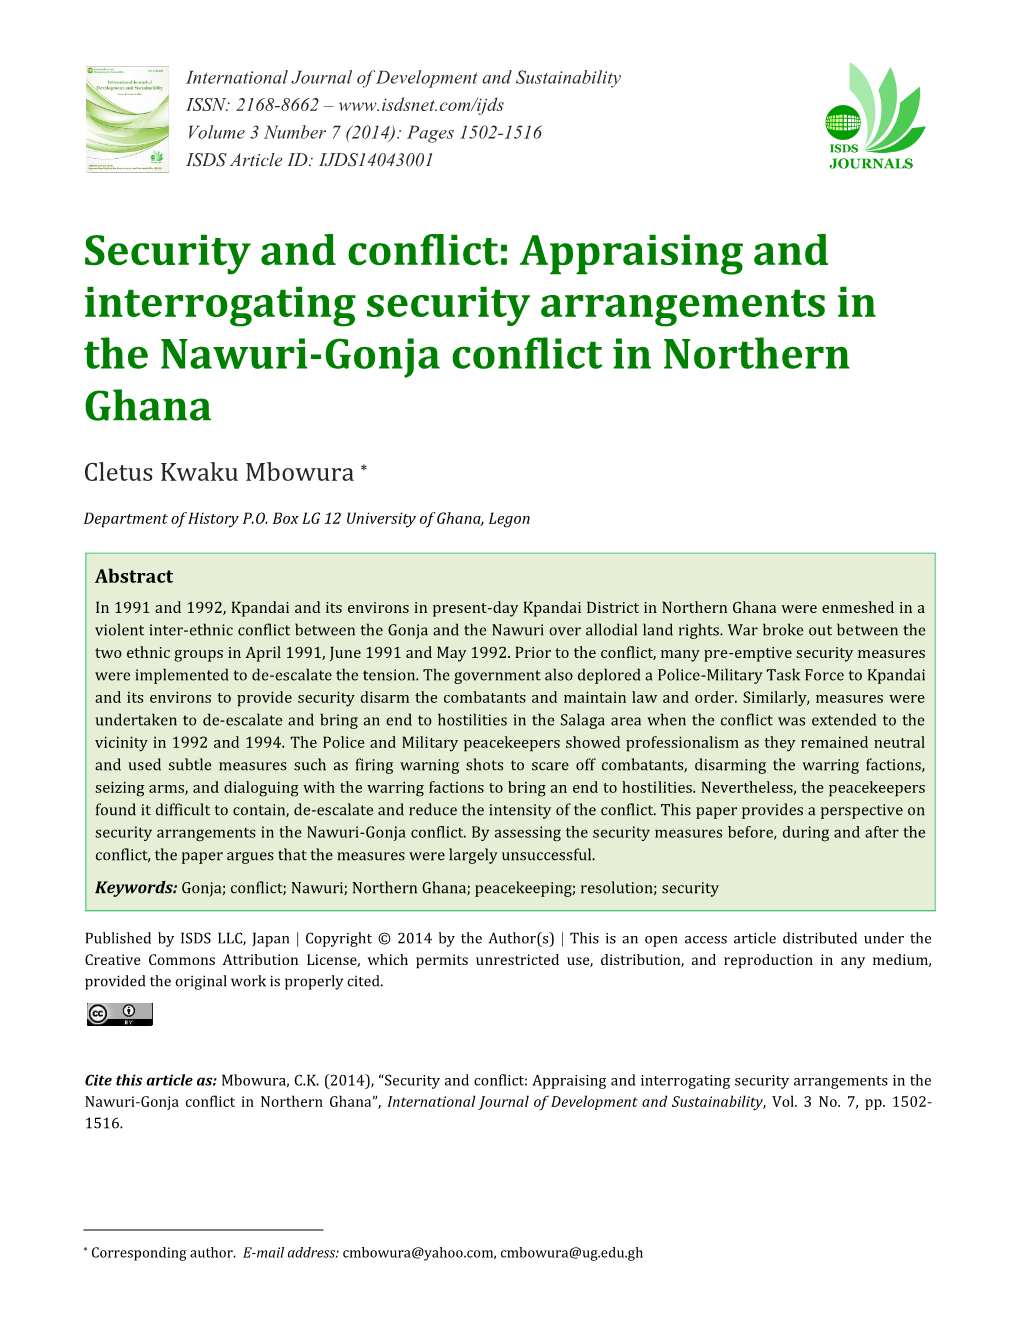 Appraising and Interrogating Security Arrangements in the Nawuri-Gonja Conflict in Northern Ghana